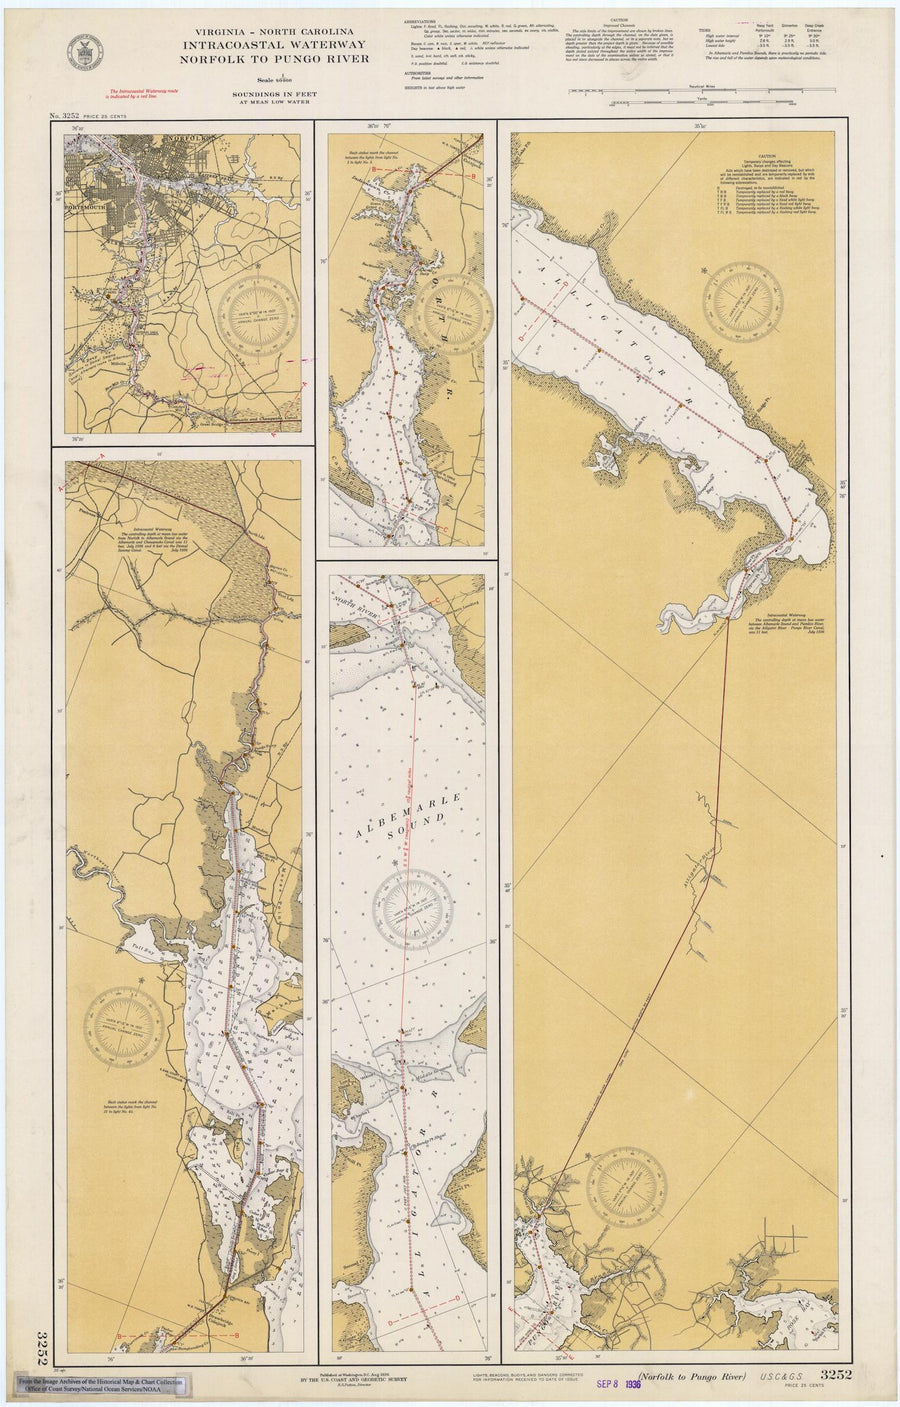 Intracoastal Waterway Map - Norfolk to Pungo River - 1936